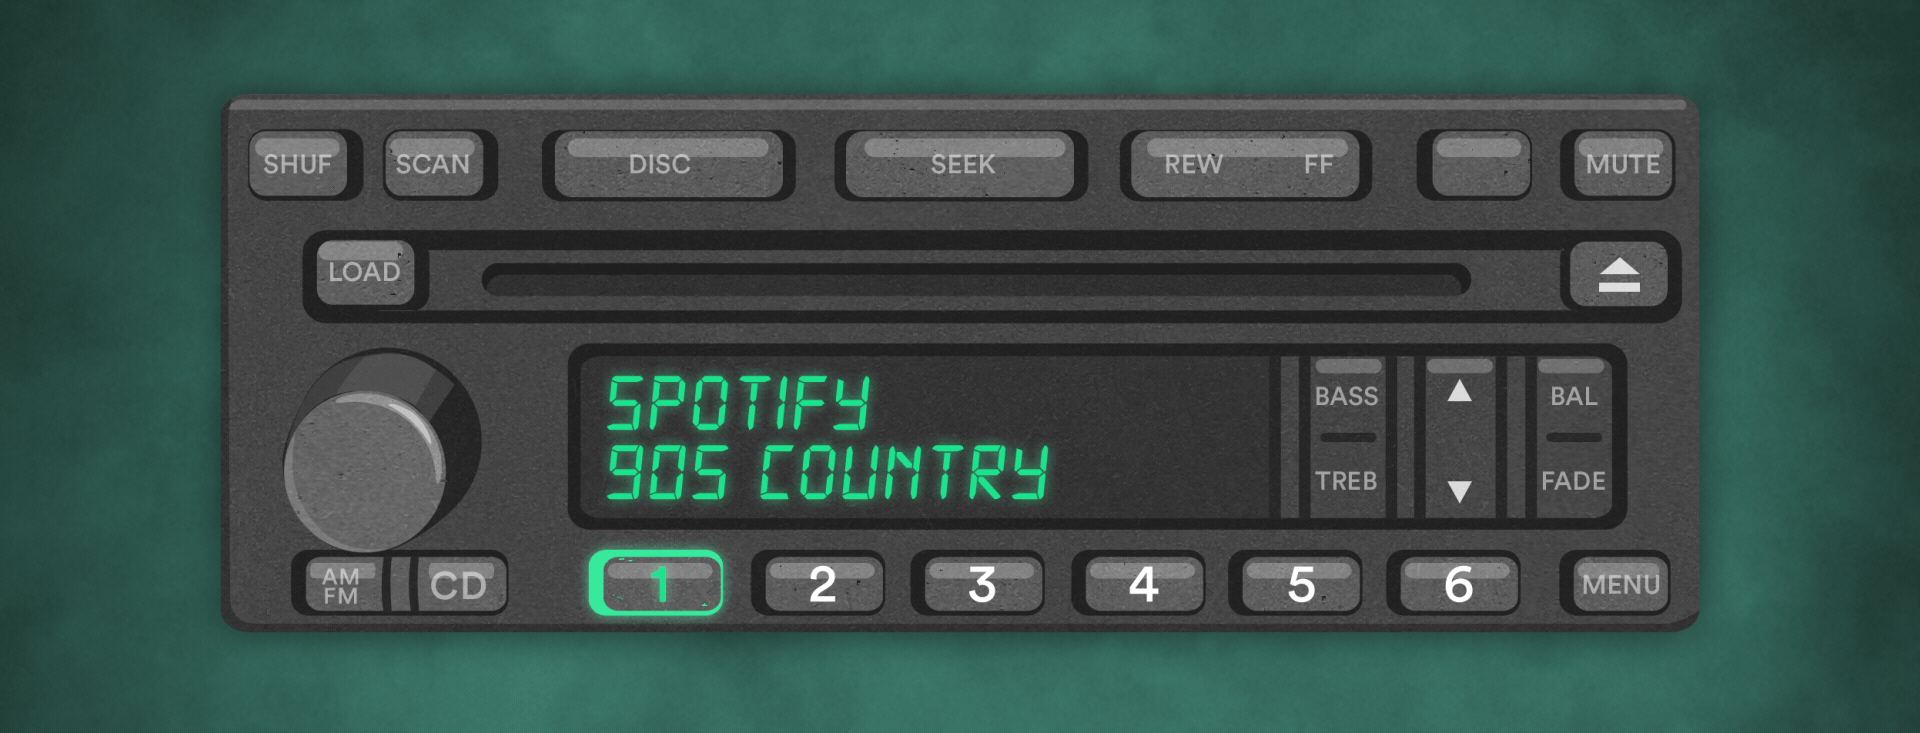 Spotify S Latest Digital Experience And Singles Are A Celebration Of 90s Country Music Nostalgia Spotify